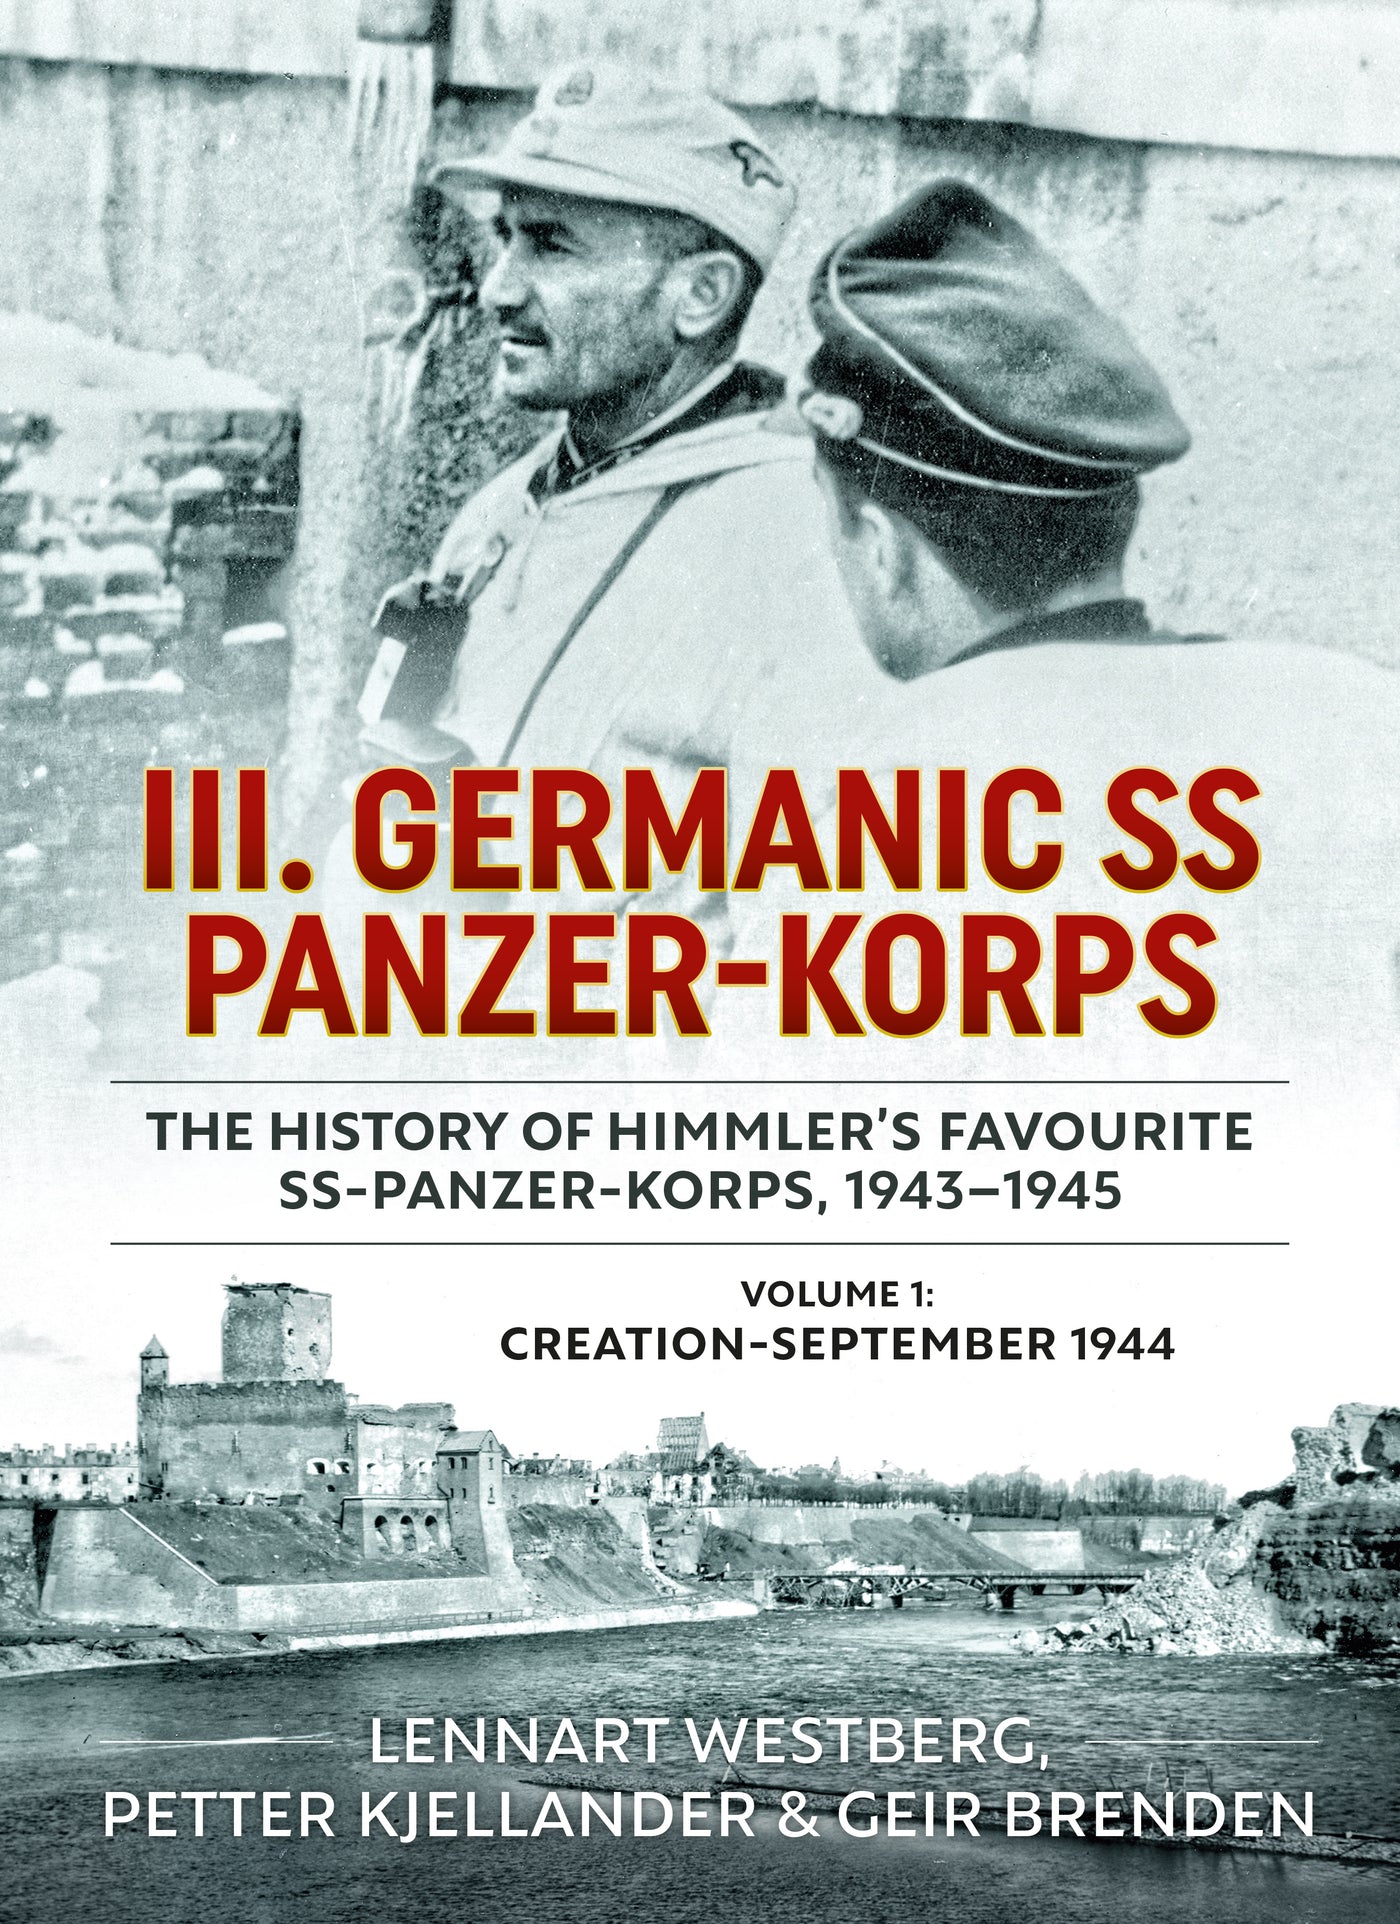 III. Germanic SS Panzer-Korps. The History of Himmler's Favourite SS Panzer-Korps, 1943-1945